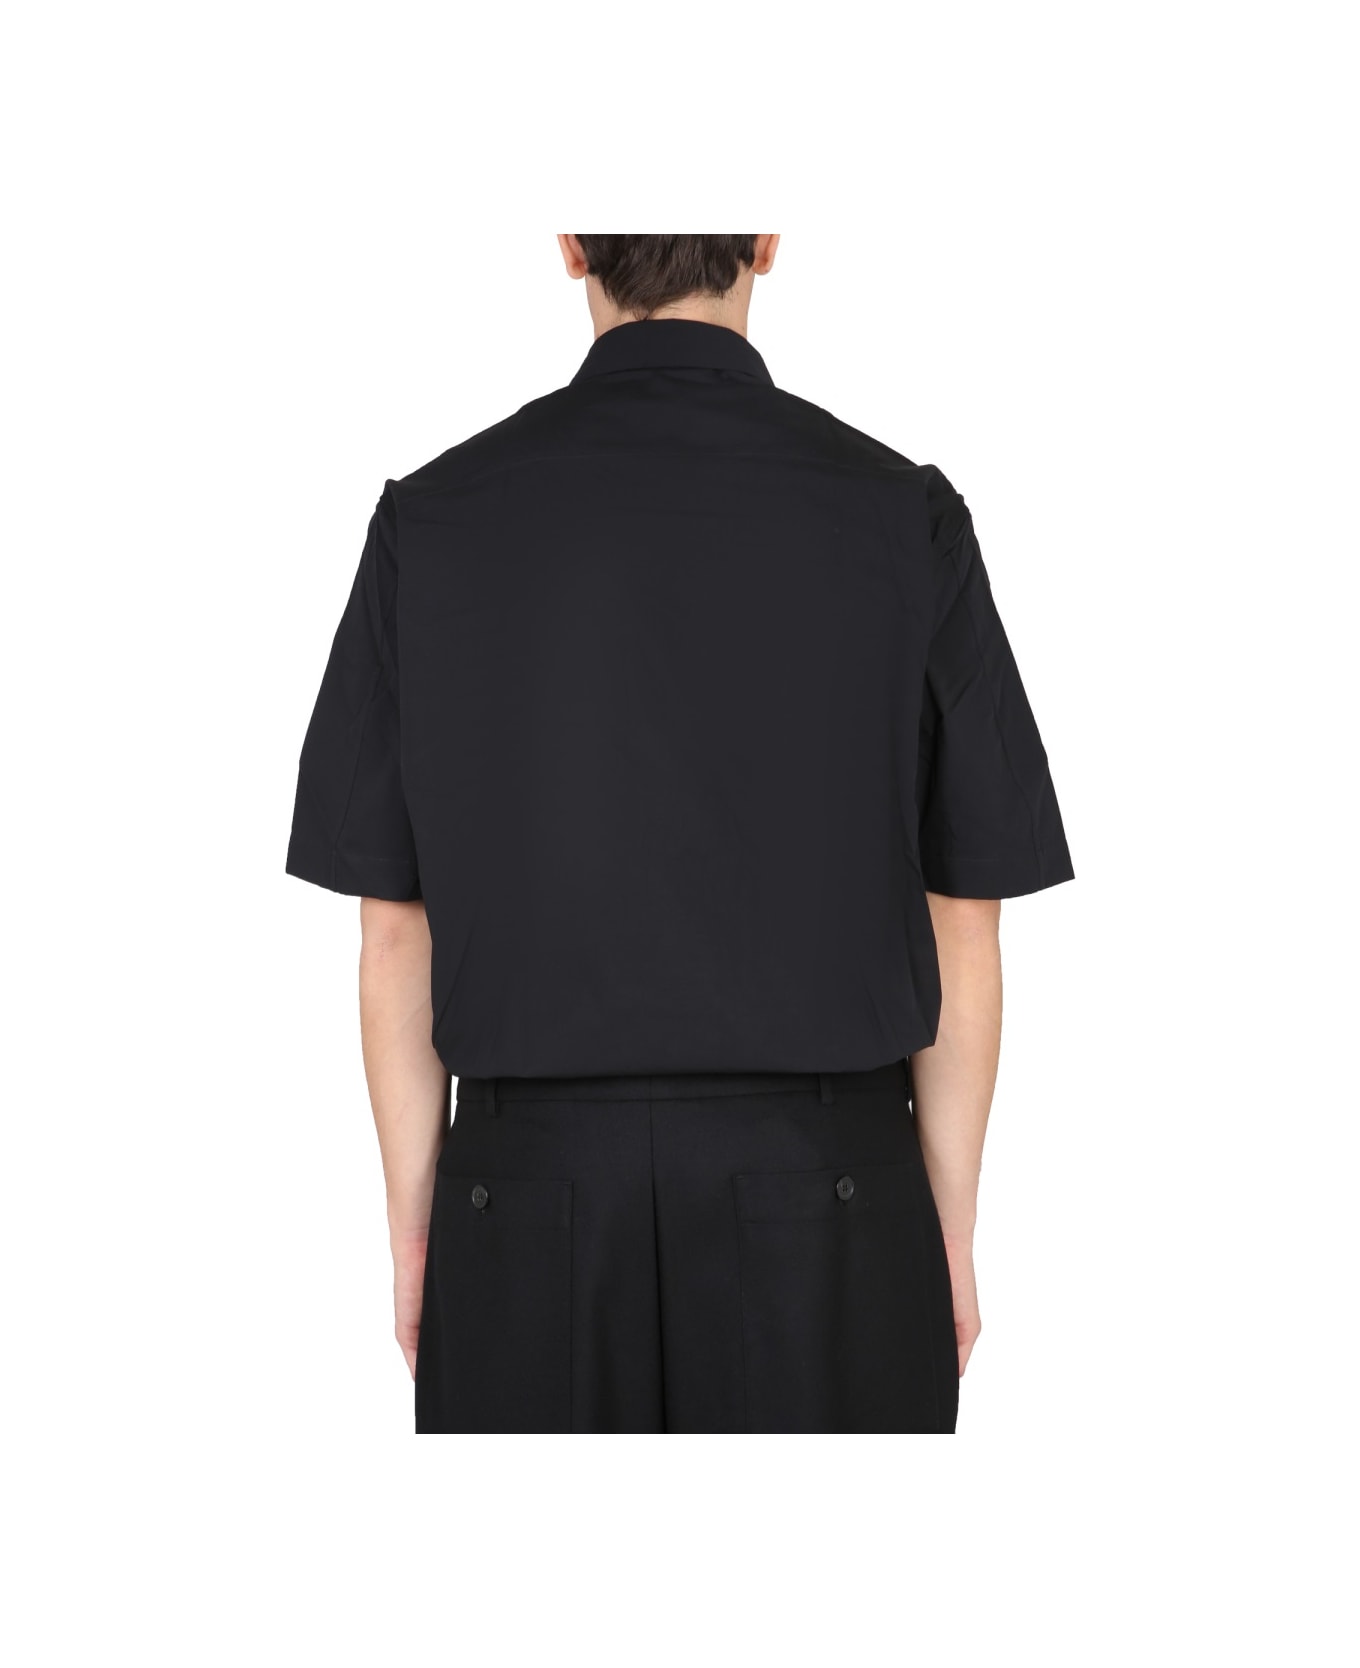 Fred Perry by Raf Simons Shirt With Patch - BLACK